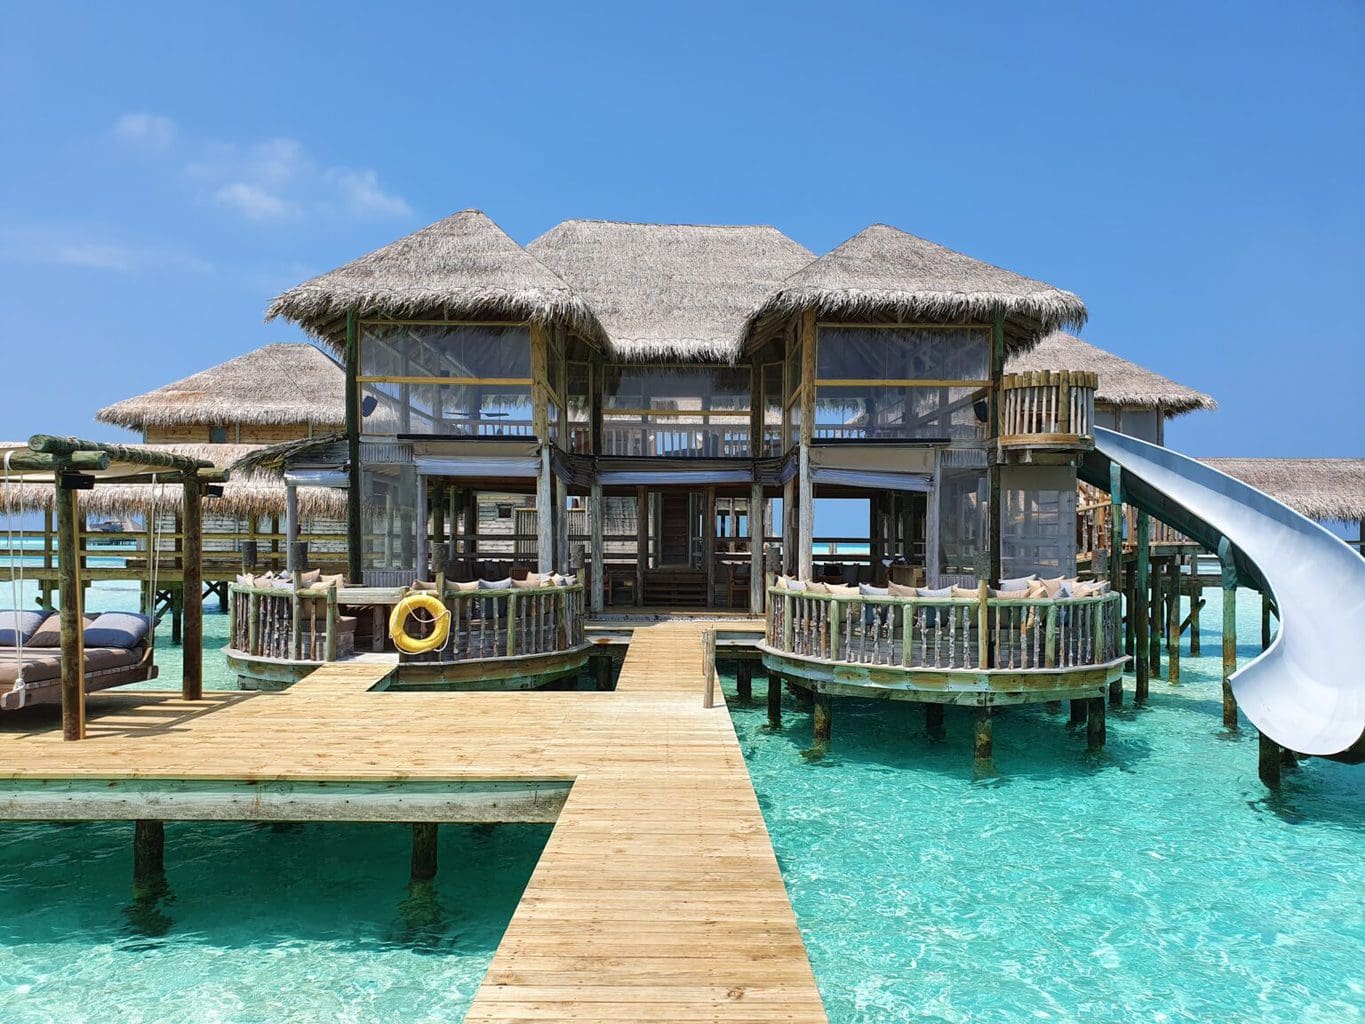 Review of Gili Lankanfushi, the best resort in the Maldives